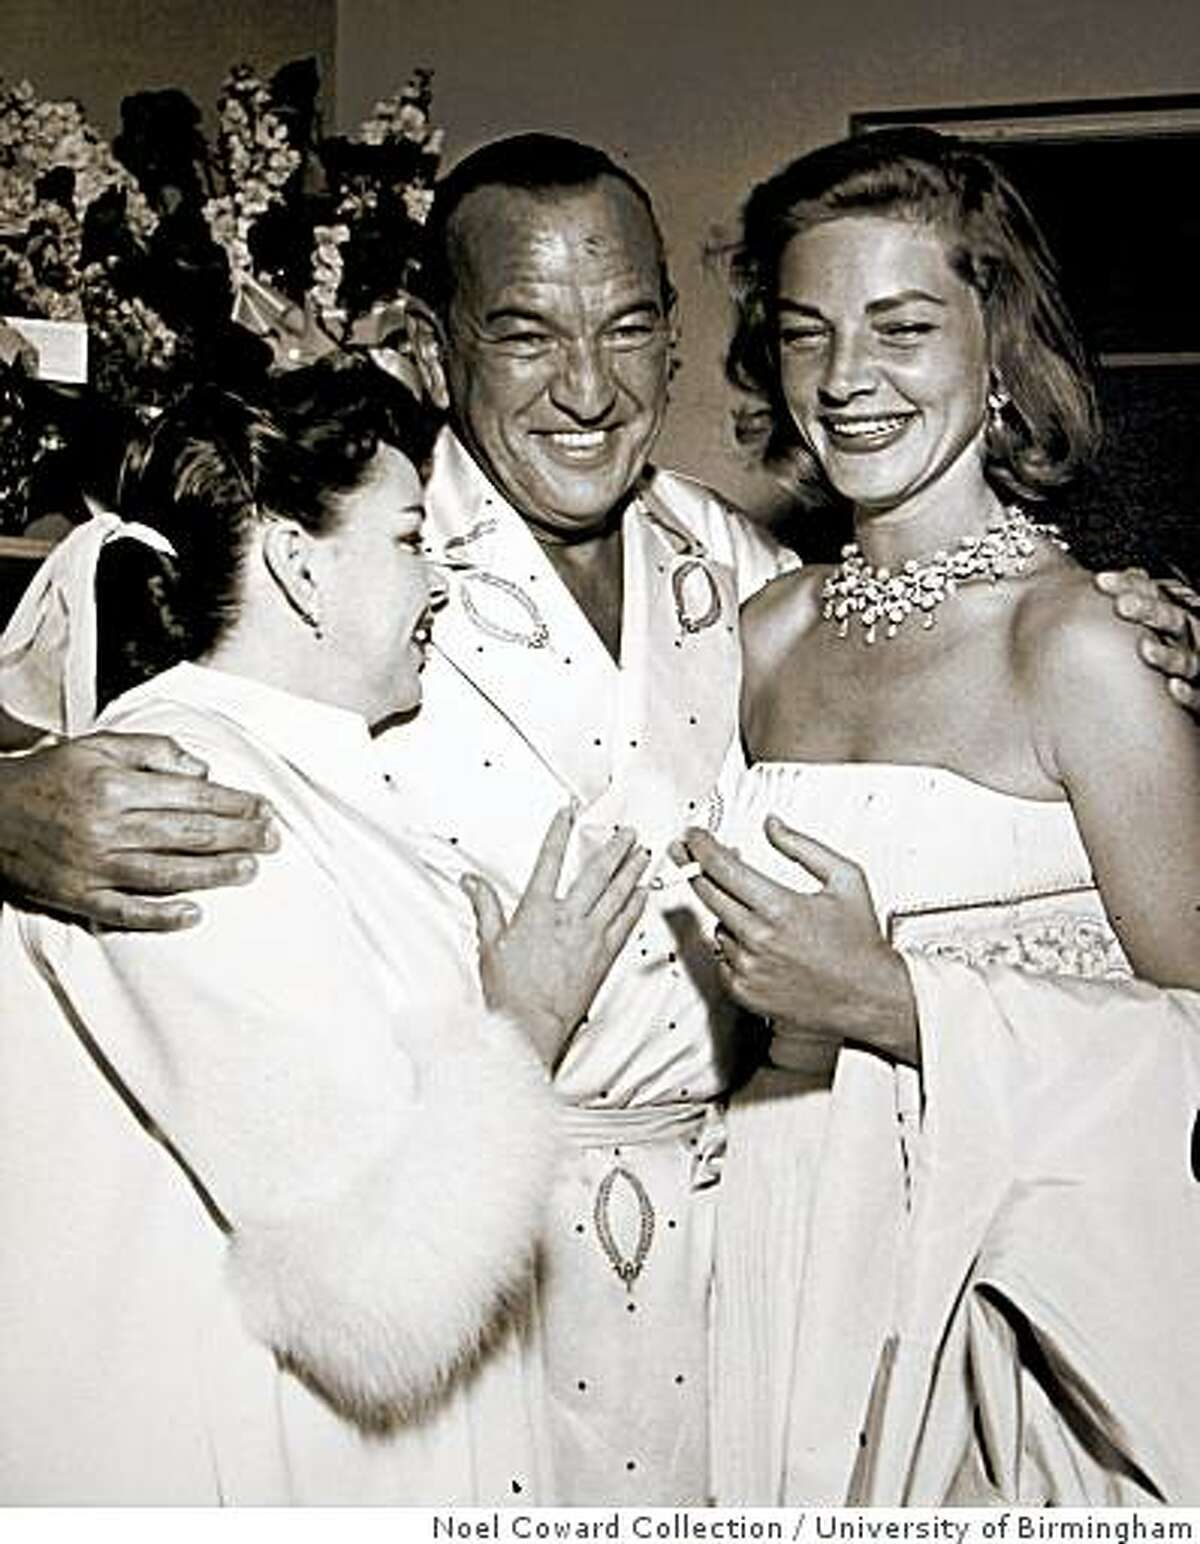 After experiencing a serious career slump following the Second World War, Coward came back with a vengeance in a smash hit nightclub act of his own songs. His star-turn in Las Vegas lead to a complete resurgence of Coward?s career. He?s shown here backstage at Wilbur Clark?s Desert Inn in Las Vegas with Judy Garland and Lauren Bacall, 1955. The dressing gown pictured here is on display in the exhibition.